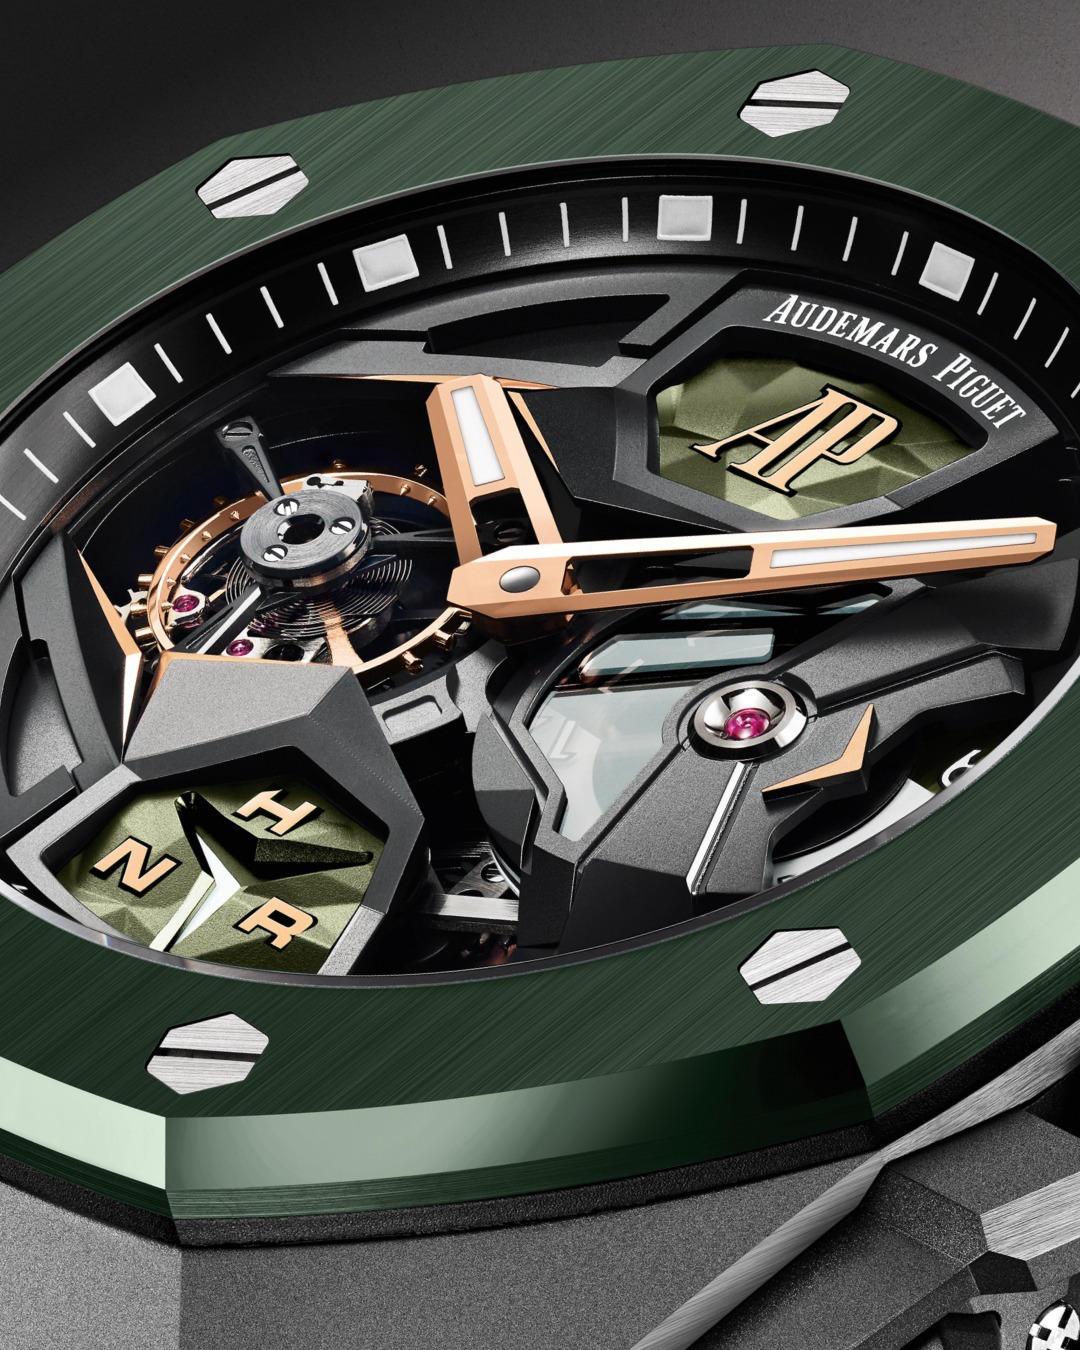 image  1 Audemars Piguet - Dressed in green for the first time